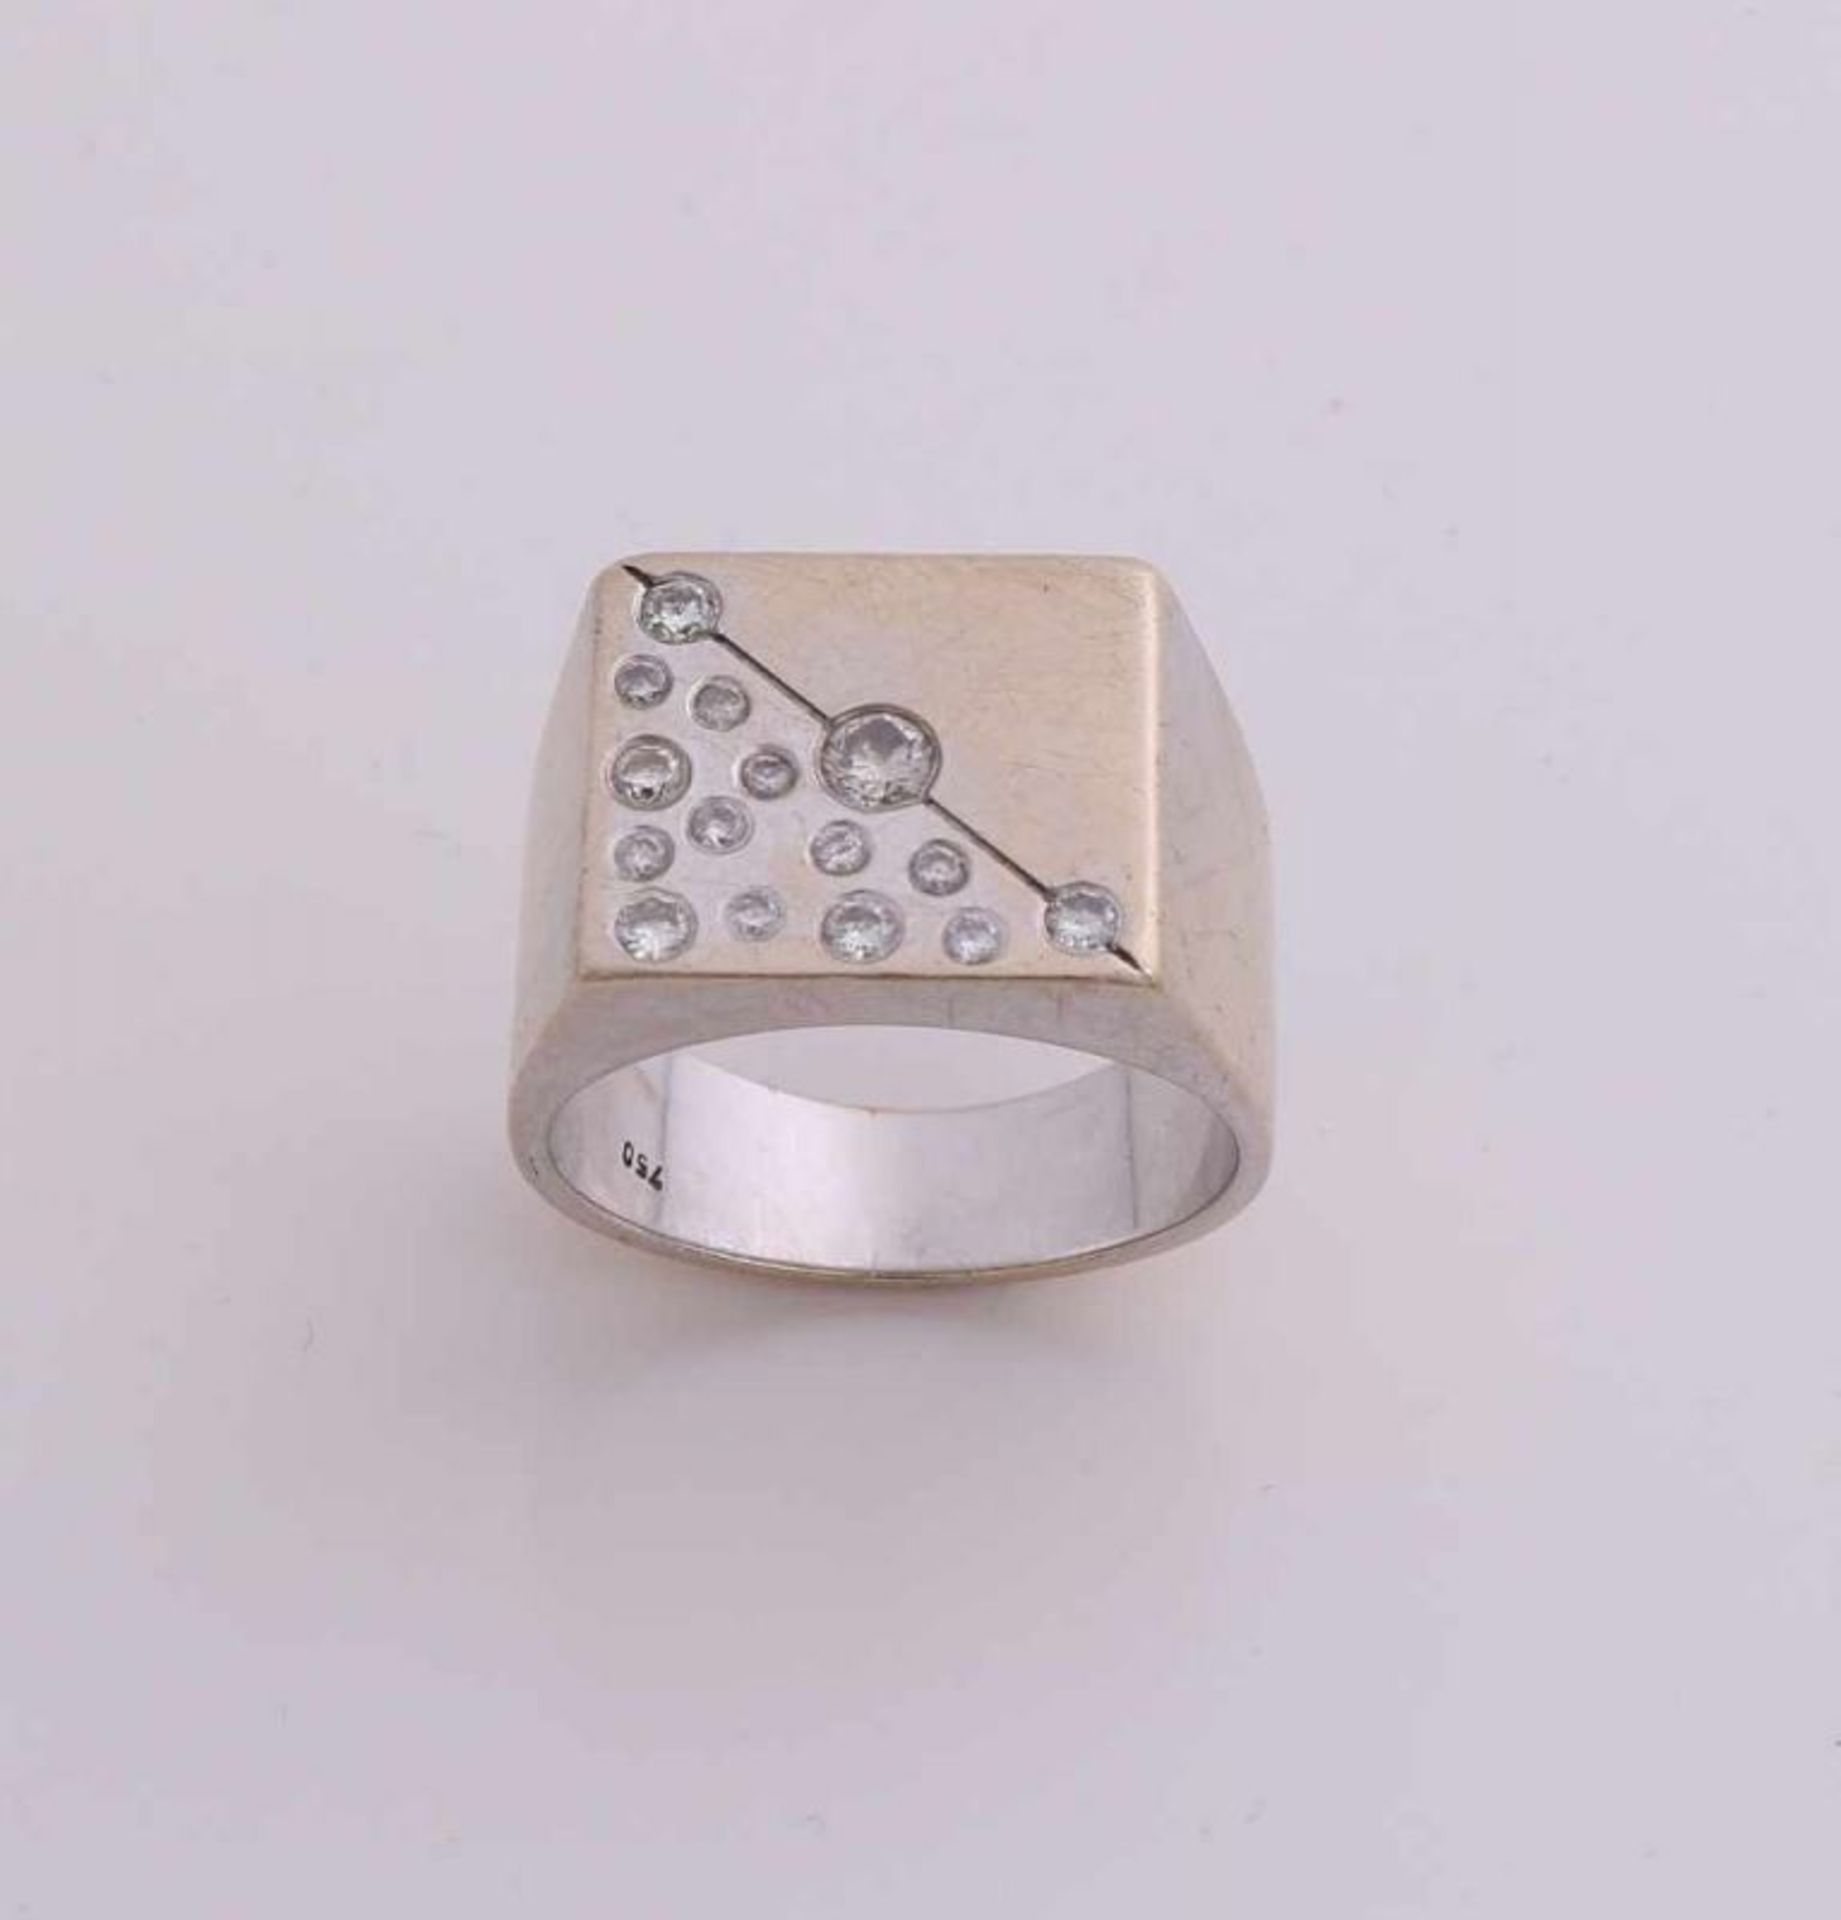 White gold men's ring, 750/000, with diamond. Heavy white gold ring with a square head set with 15